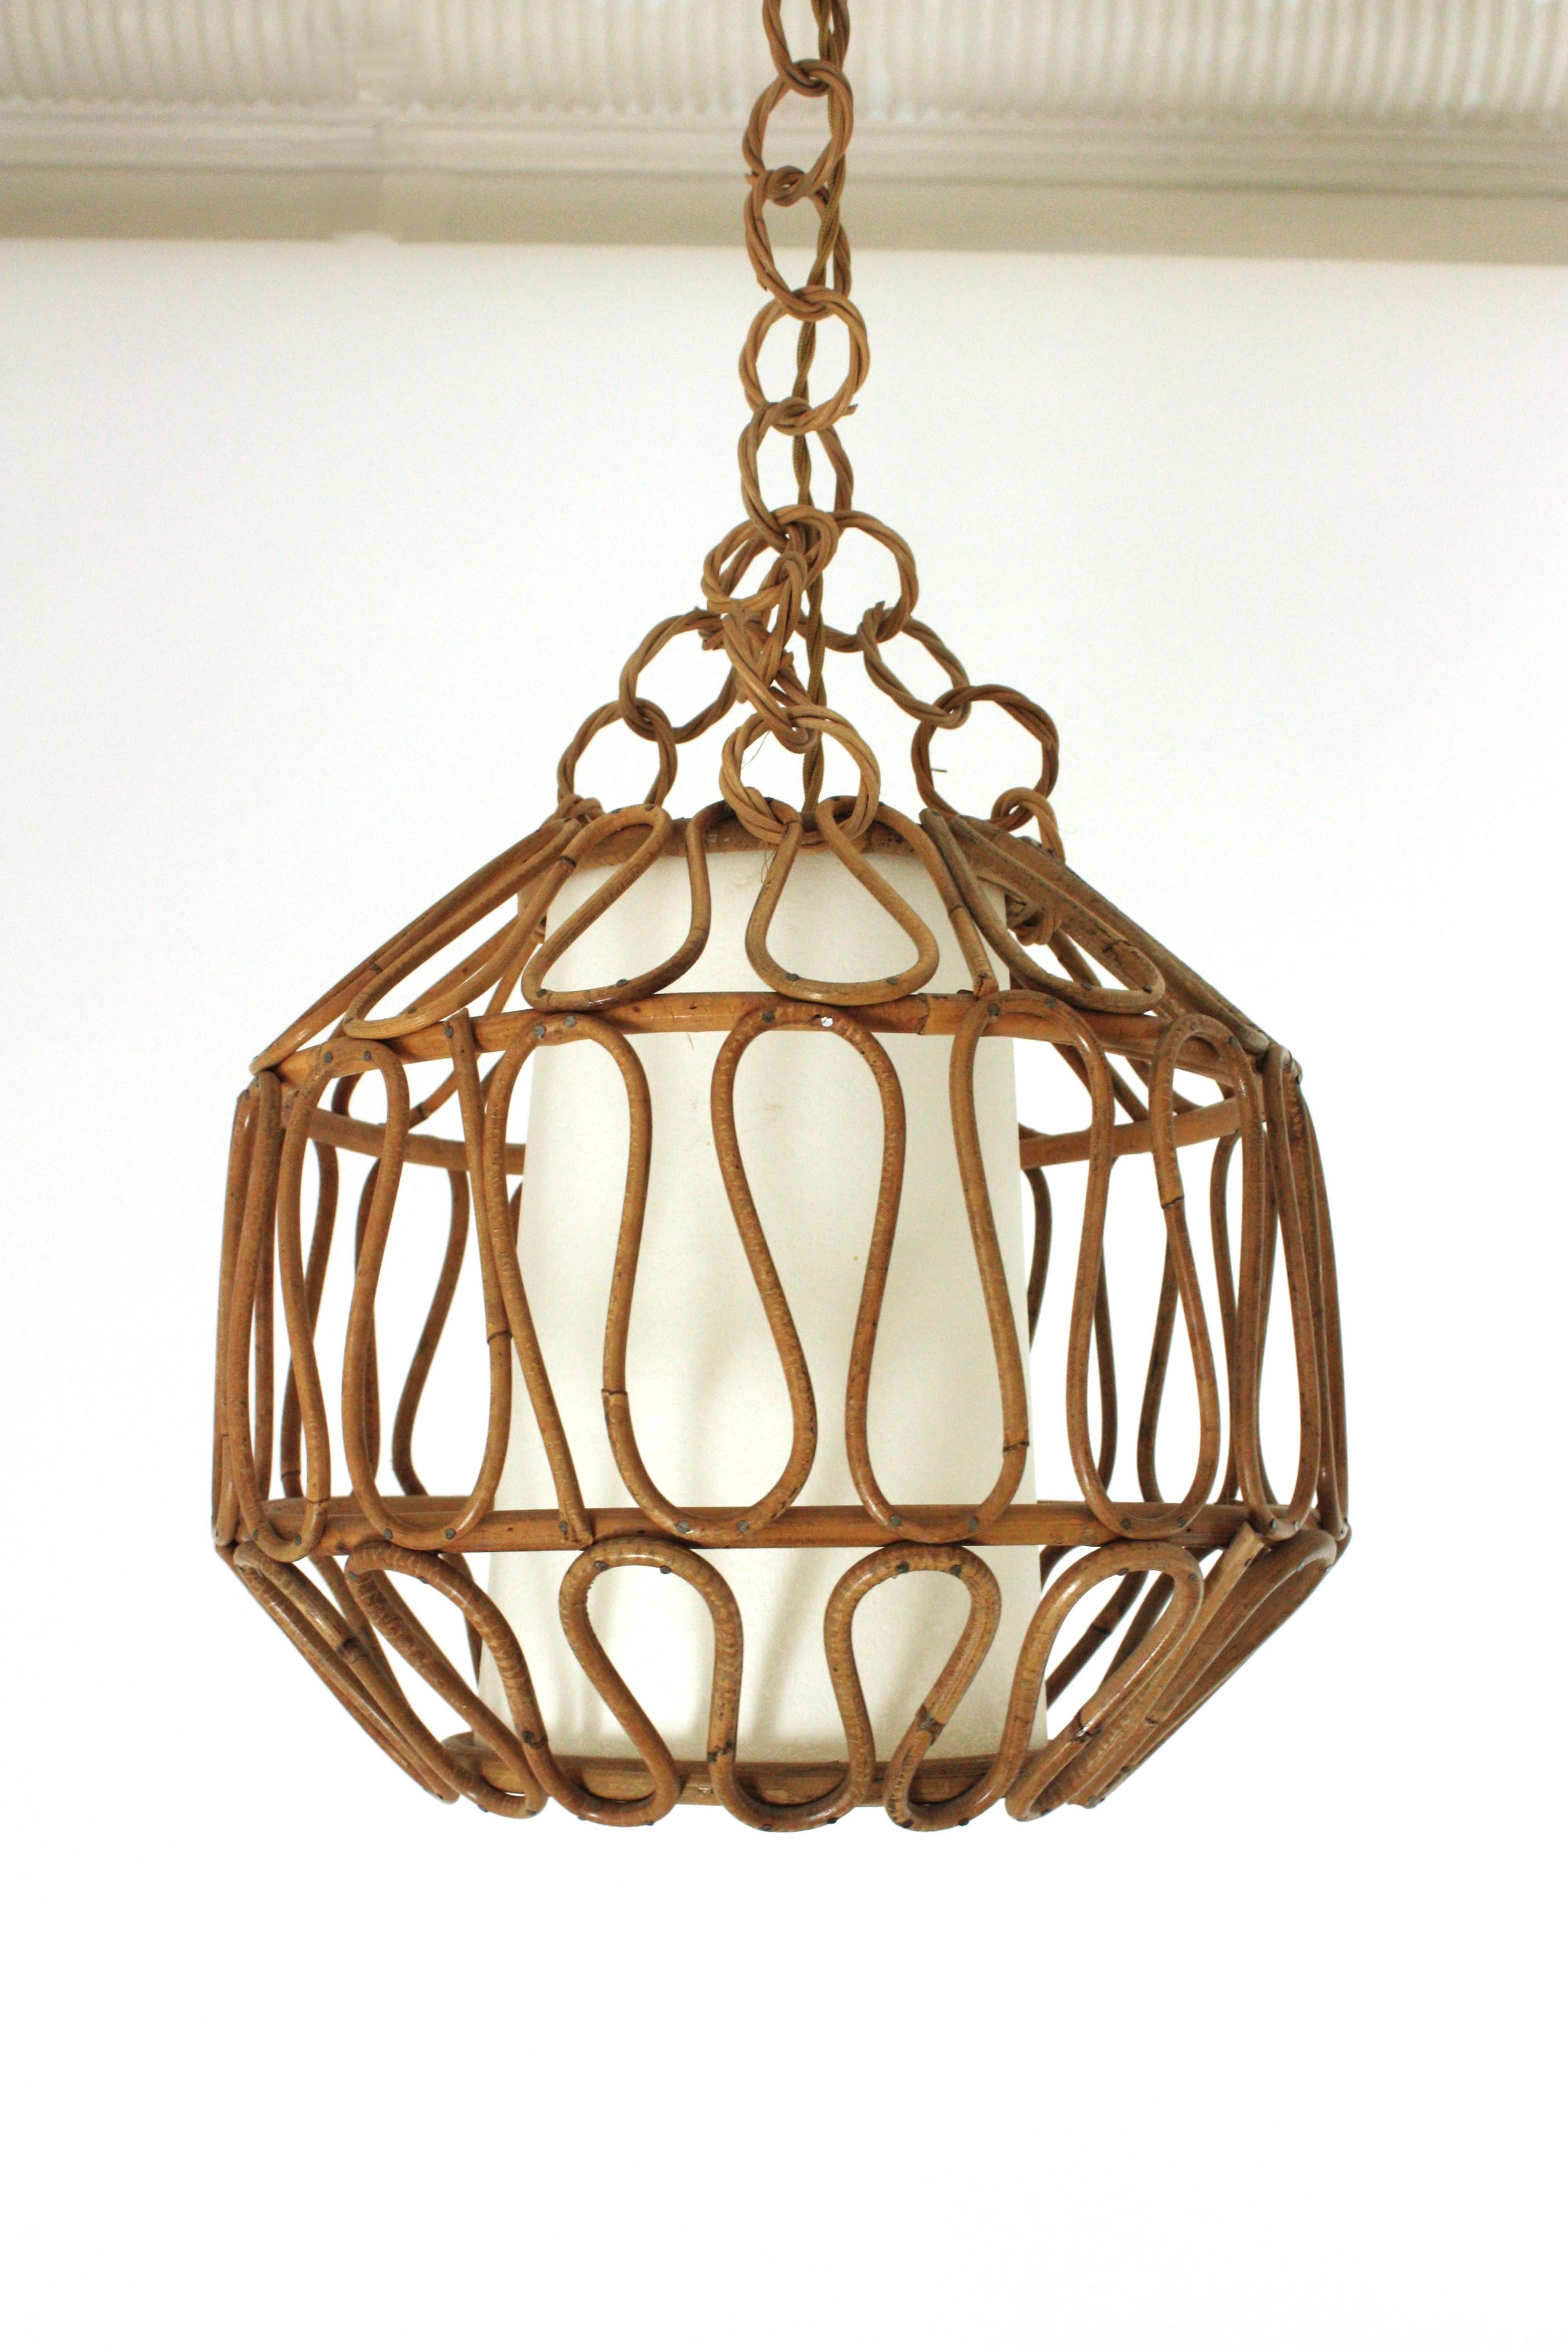 Spanish Rattan Globe Pendant Light or Lantern with Loop Details, Spain, 1960s For Sale